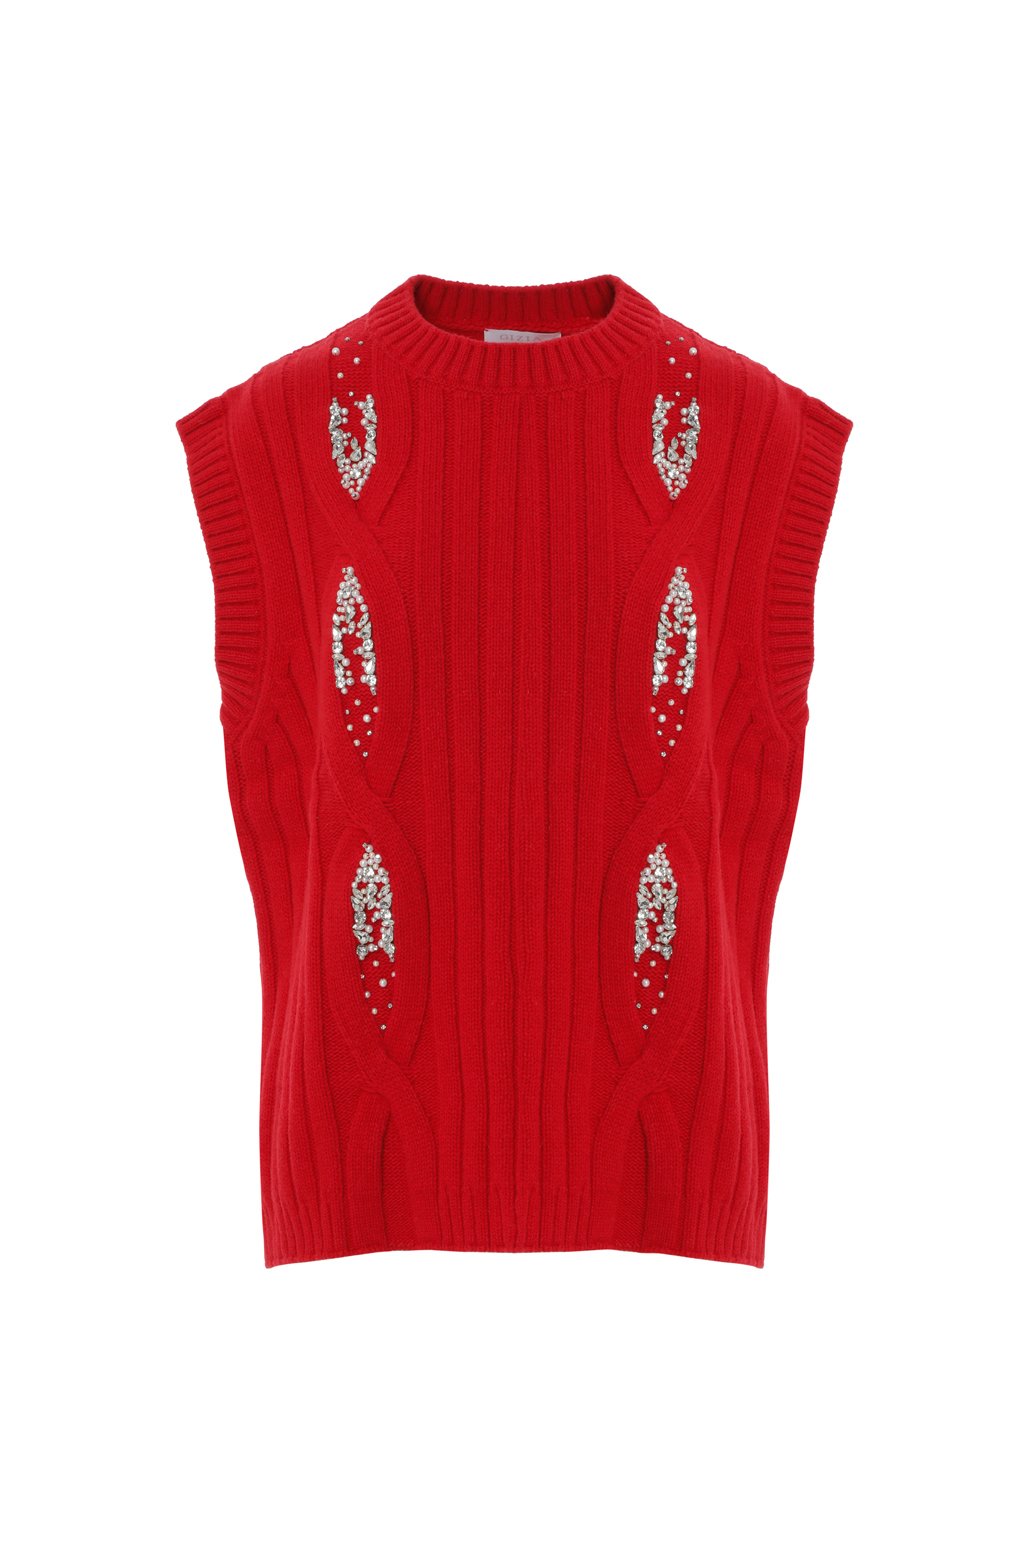 Stone Embroidered Detail Red Knitwear Sweater